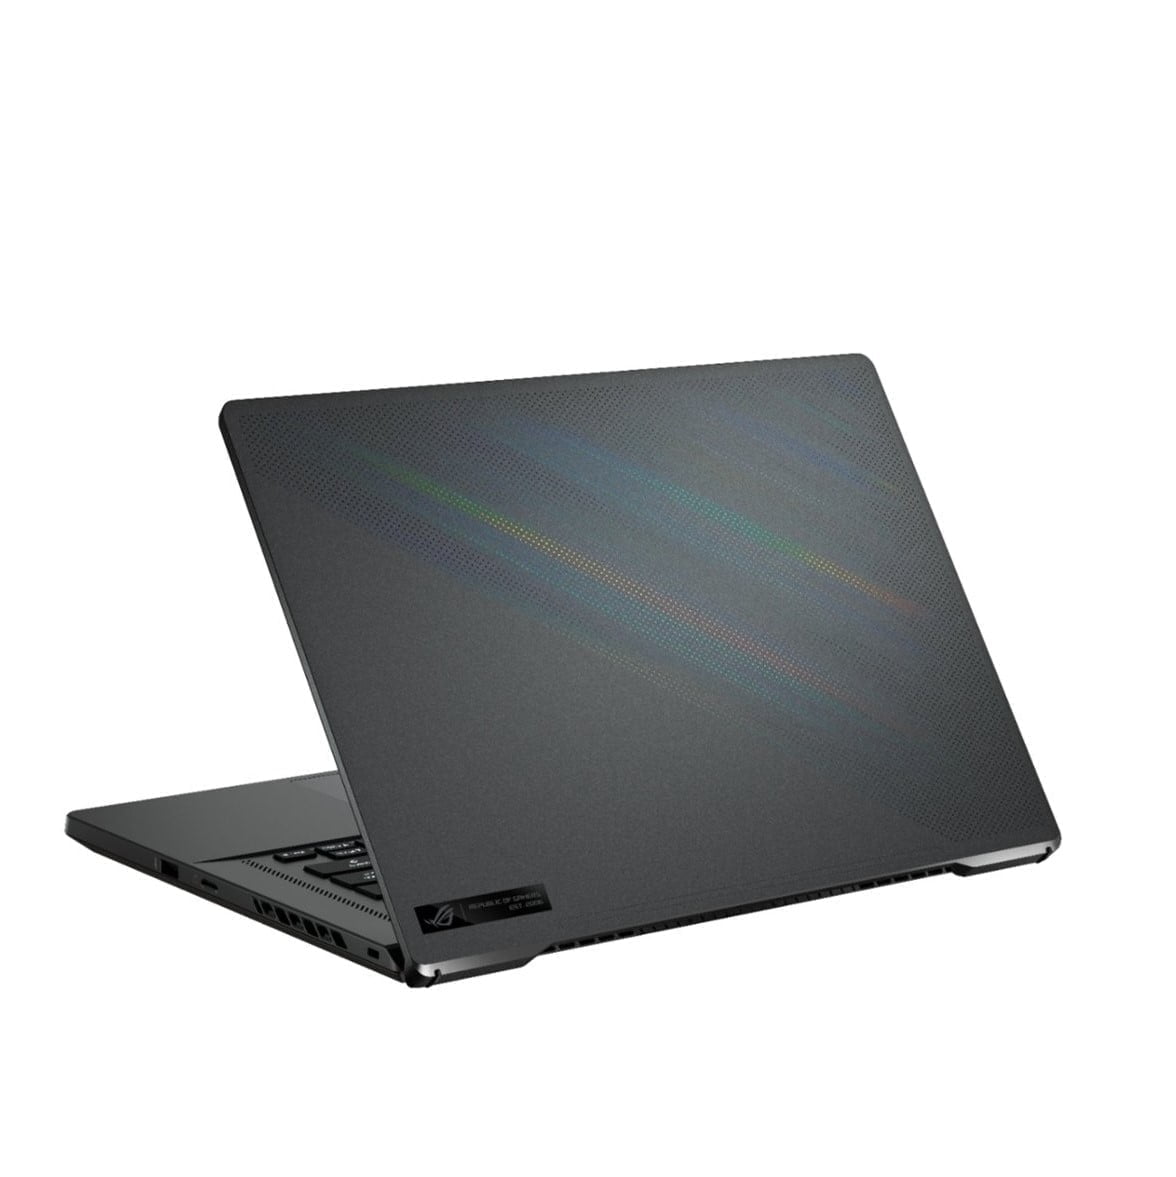 6448848Cv4D Asus &Lt;H1 Class=&Quot;Heading-5 V-Fw-Regular&Quot;&Gt;Asus - Rog Zephyrus 15.6&Quot; Qhd Gaming Laptop - Amd Ryzen 9 - 16Gb Memory - Nvidia Geforce Rtx 3070 - 1Tb Ssd - Eclipse Grey&Lt;/H1&Gt;&Lt;P&Gt;Asus Rog Zephyrus Gaming Laptop. Enjoy Everyday Gaming With This Asus Notebook Pc. The Amd Ryzen 9 Processor And 16Gb Of Ram Let You Run Graphics-Heavy Games Smoothly, While The Potent Nvidia Geforce Rtx 3070 Graphics Produce High-Quality Visuals On The Fast 15.6-Inch 165Hz Qhd Display. This Asus Notebook Pc Has 1Td Ssd That Shortens Load Times And Offers Ample Storage.&Lt;/P&Gt; Asus Rog Gaming Laptop Asus - Rog Zephyrus 15.6&Quot; Qhd Gaming Laptop - Amd Ryzen 9 - 16Gb Memory - Nvidia Geforce Rtx 3070 - 1Tb Ssd - Eclipse Grey